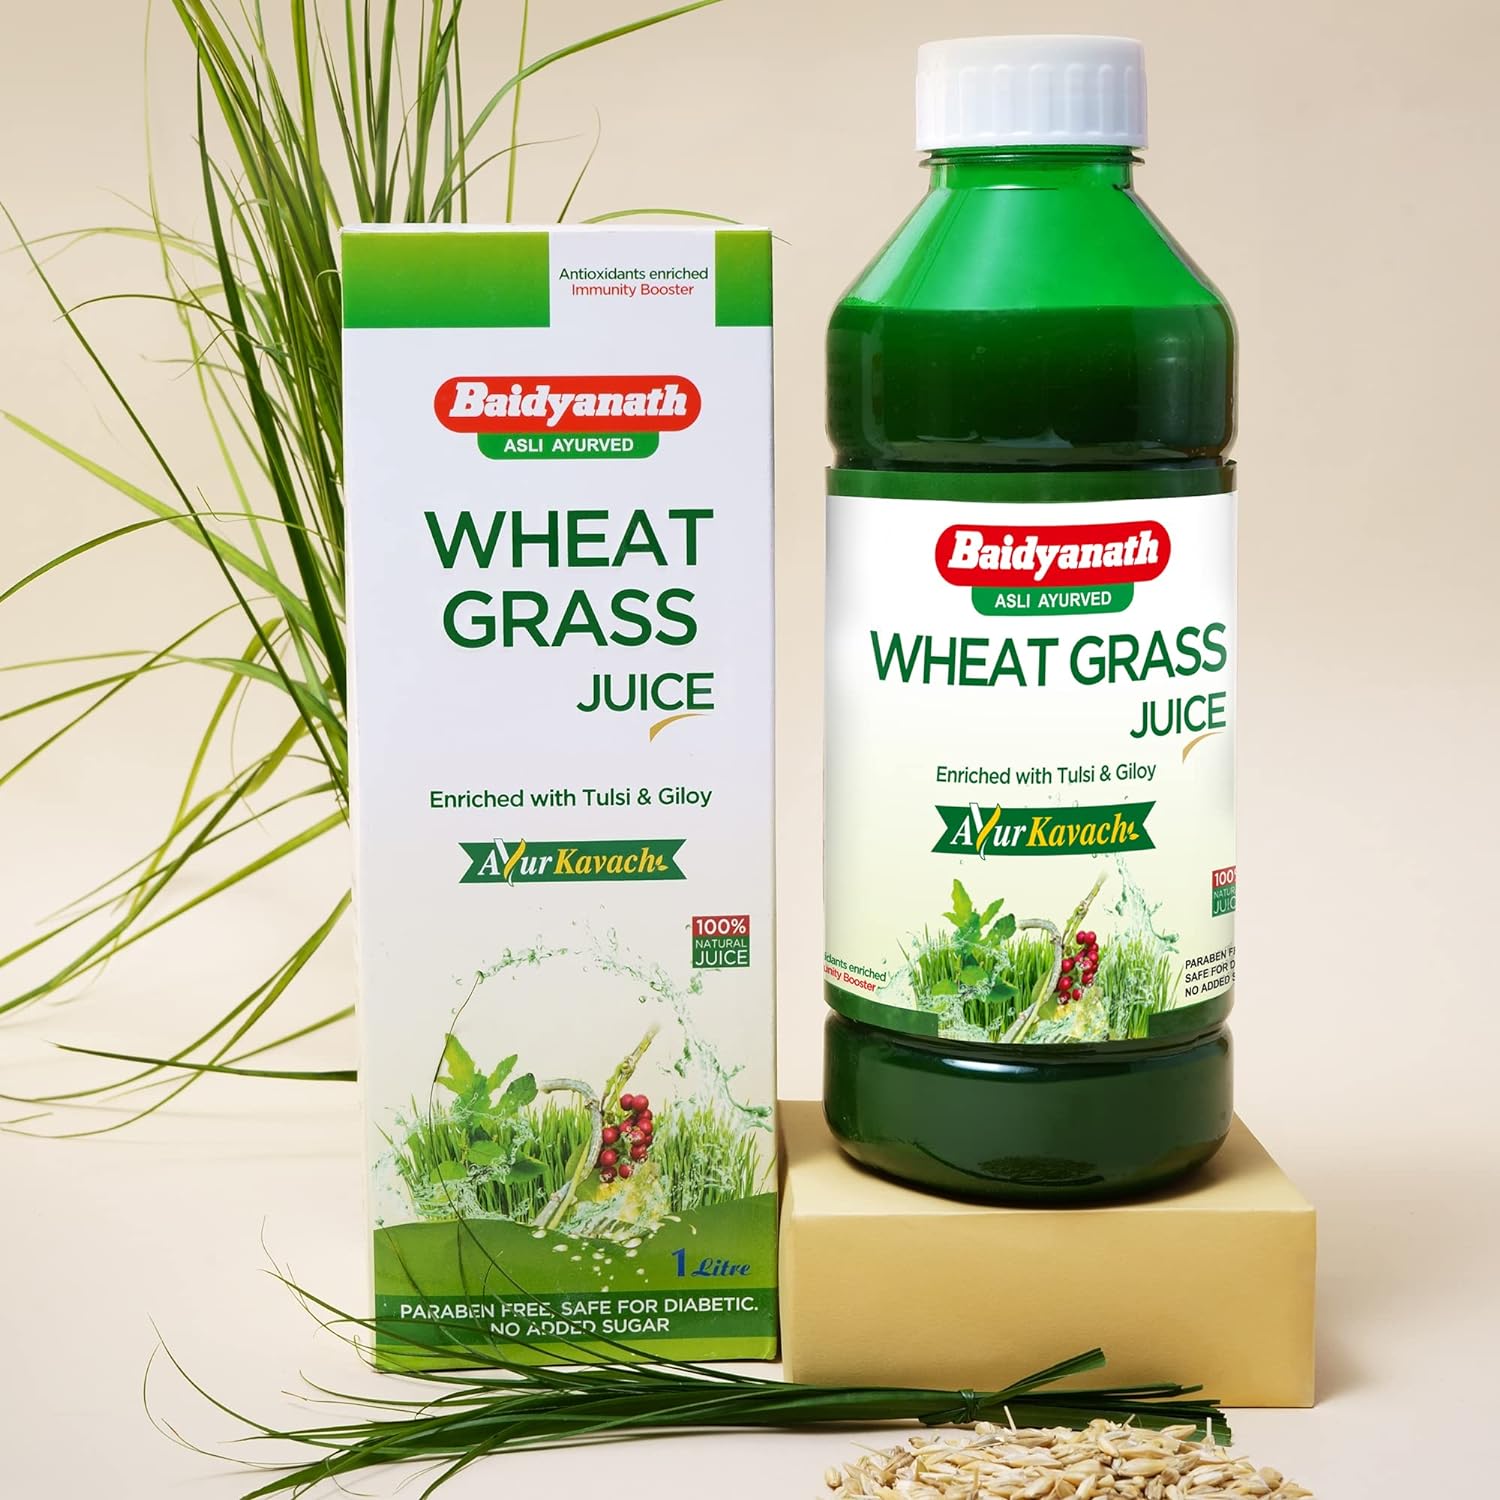 Baidyanath (Jhansi) Wheat Grass Juice Enriched with Tulsi & Giloy